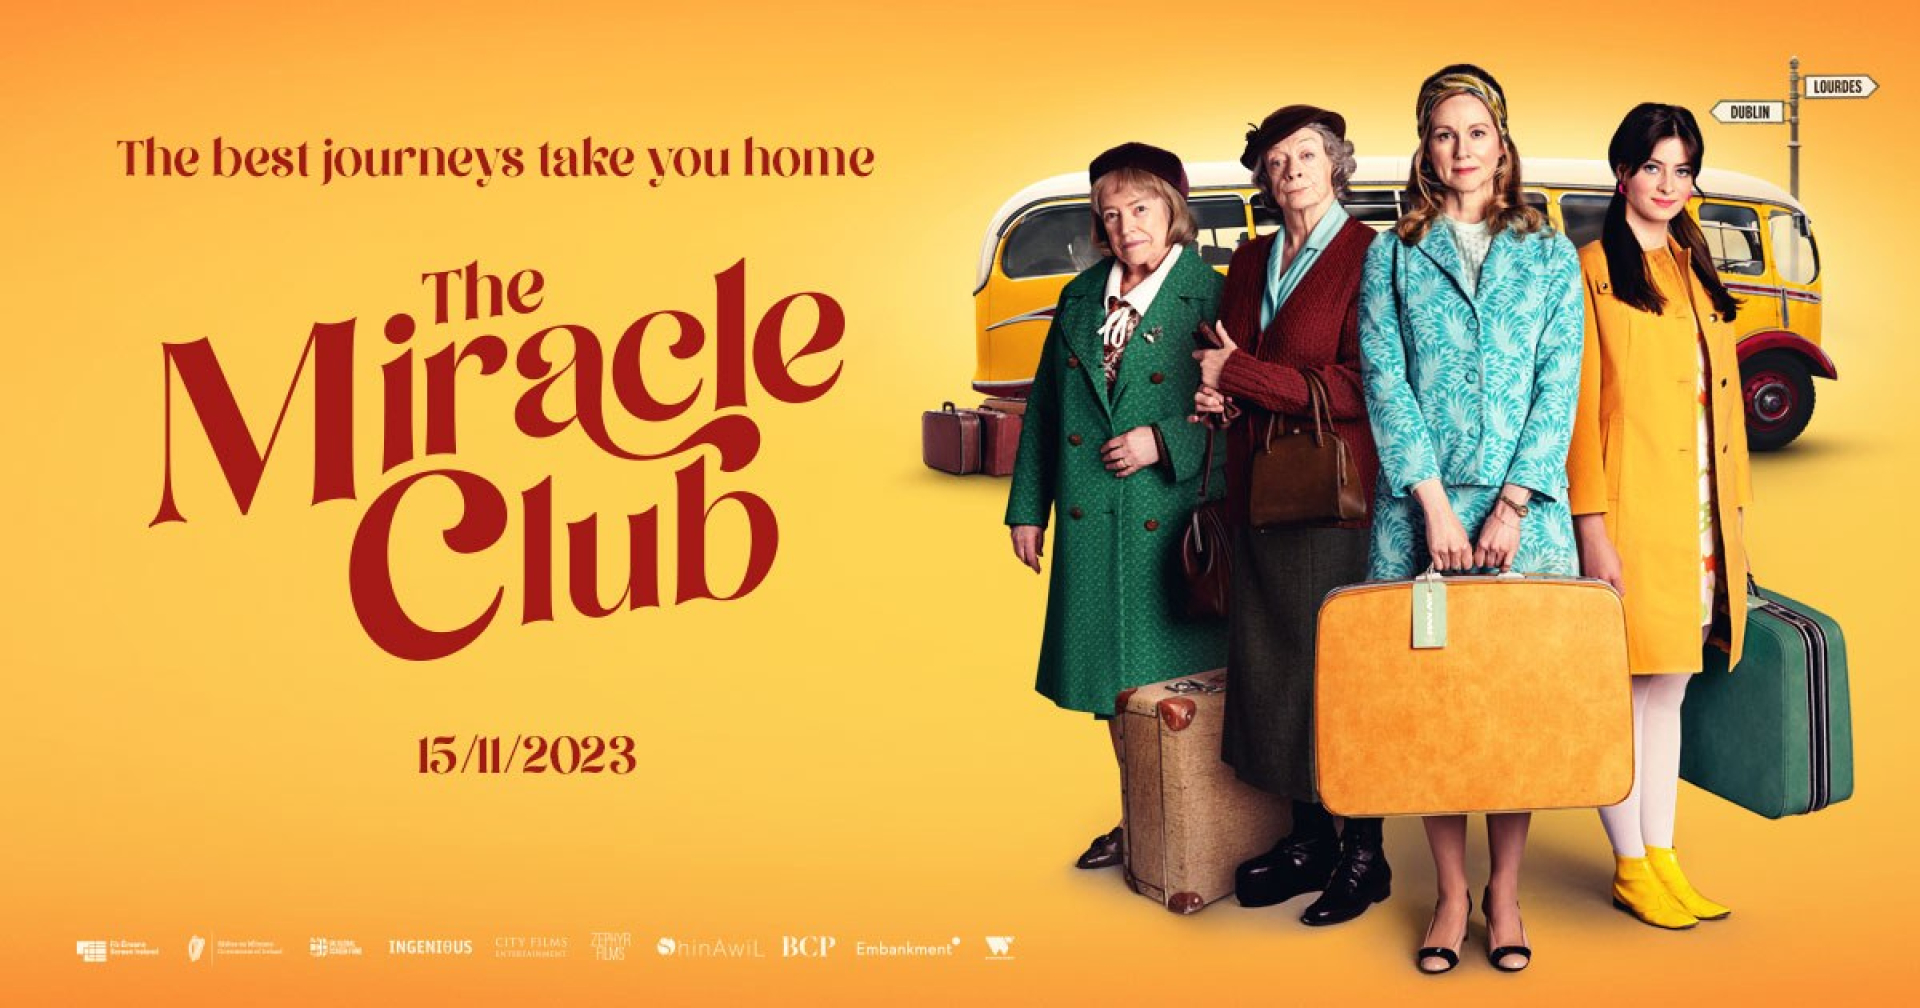 Facebook Visual THE MIRACLE CLUB 1200x630 15 11 2023